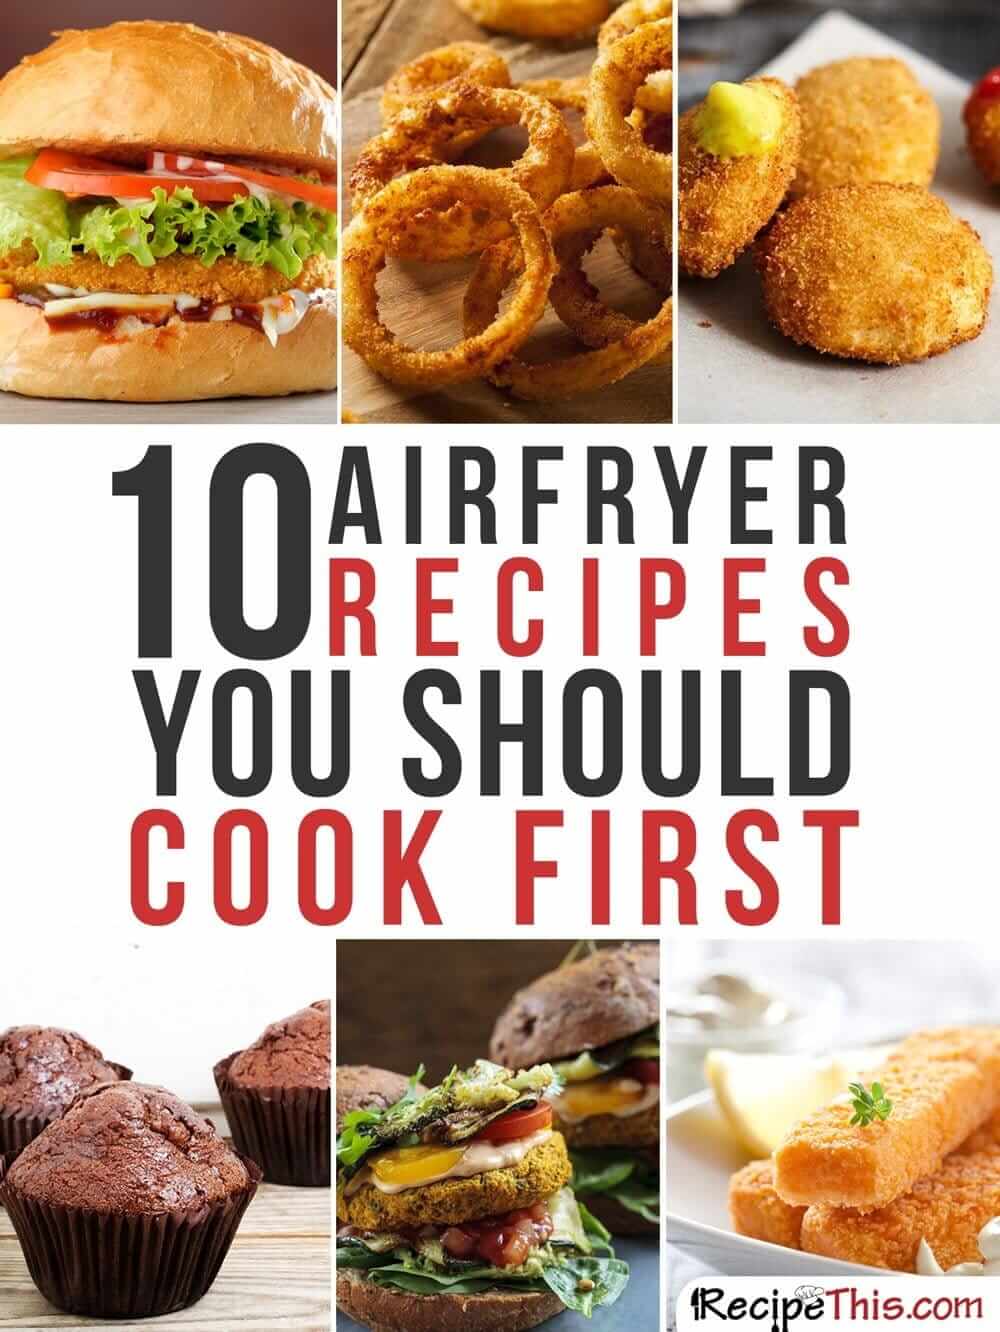 Airfryer Recipes | Top 10 Philips Airfryer Recipes You Should Cook First from RecipeThis.com